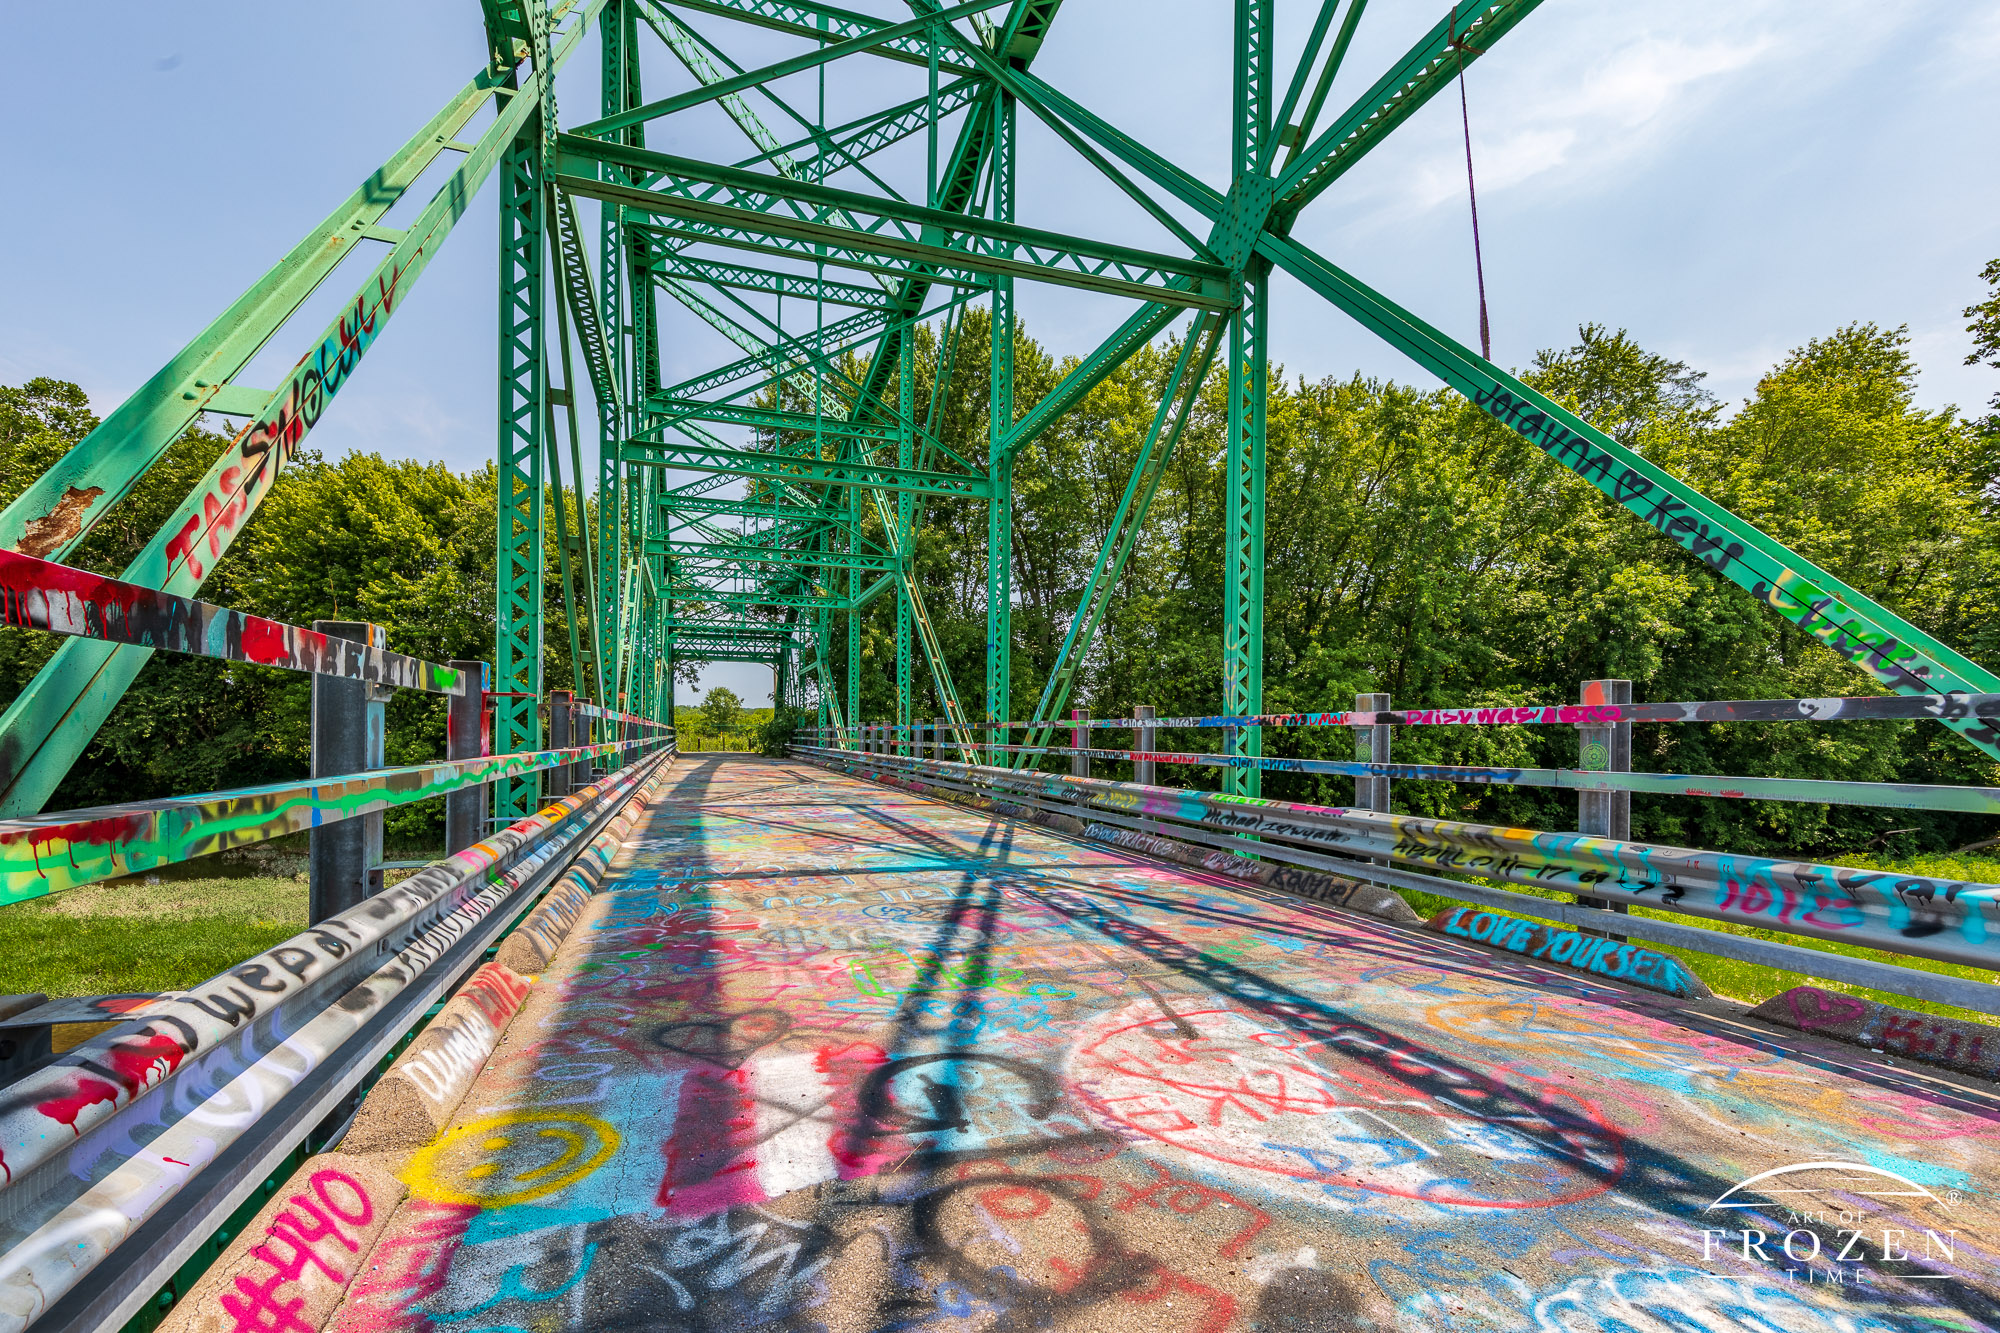 An abandoned Steel-truss bridge that now serves as a place for positive graffiti